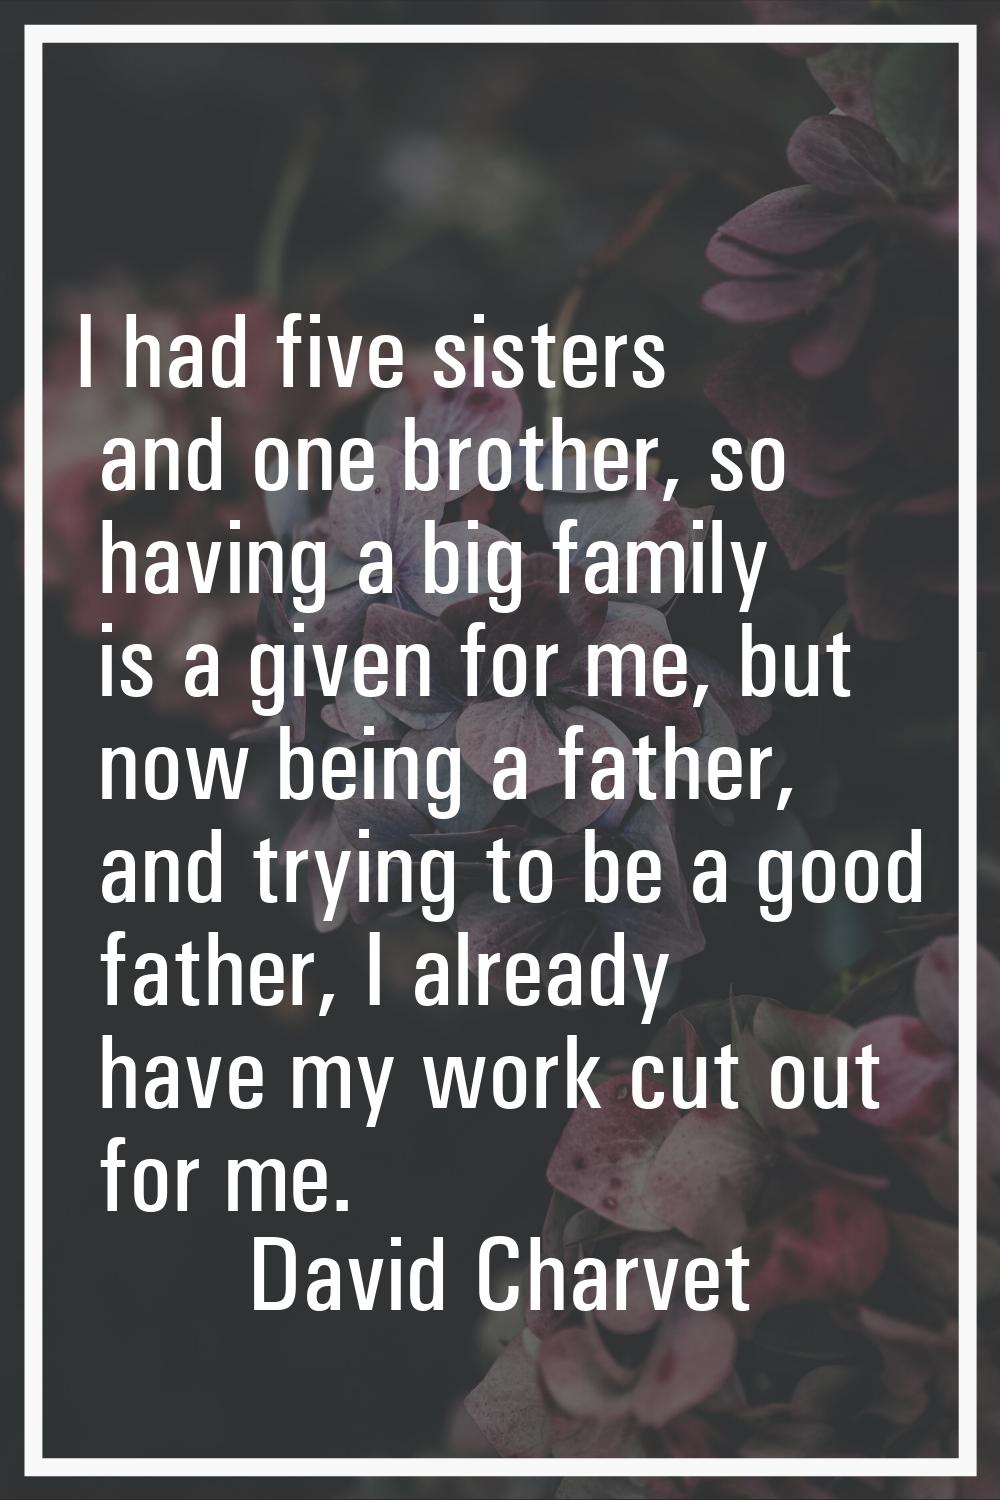 I had five sisters and one brother, so having a big family is a given for me, but now being a fathe